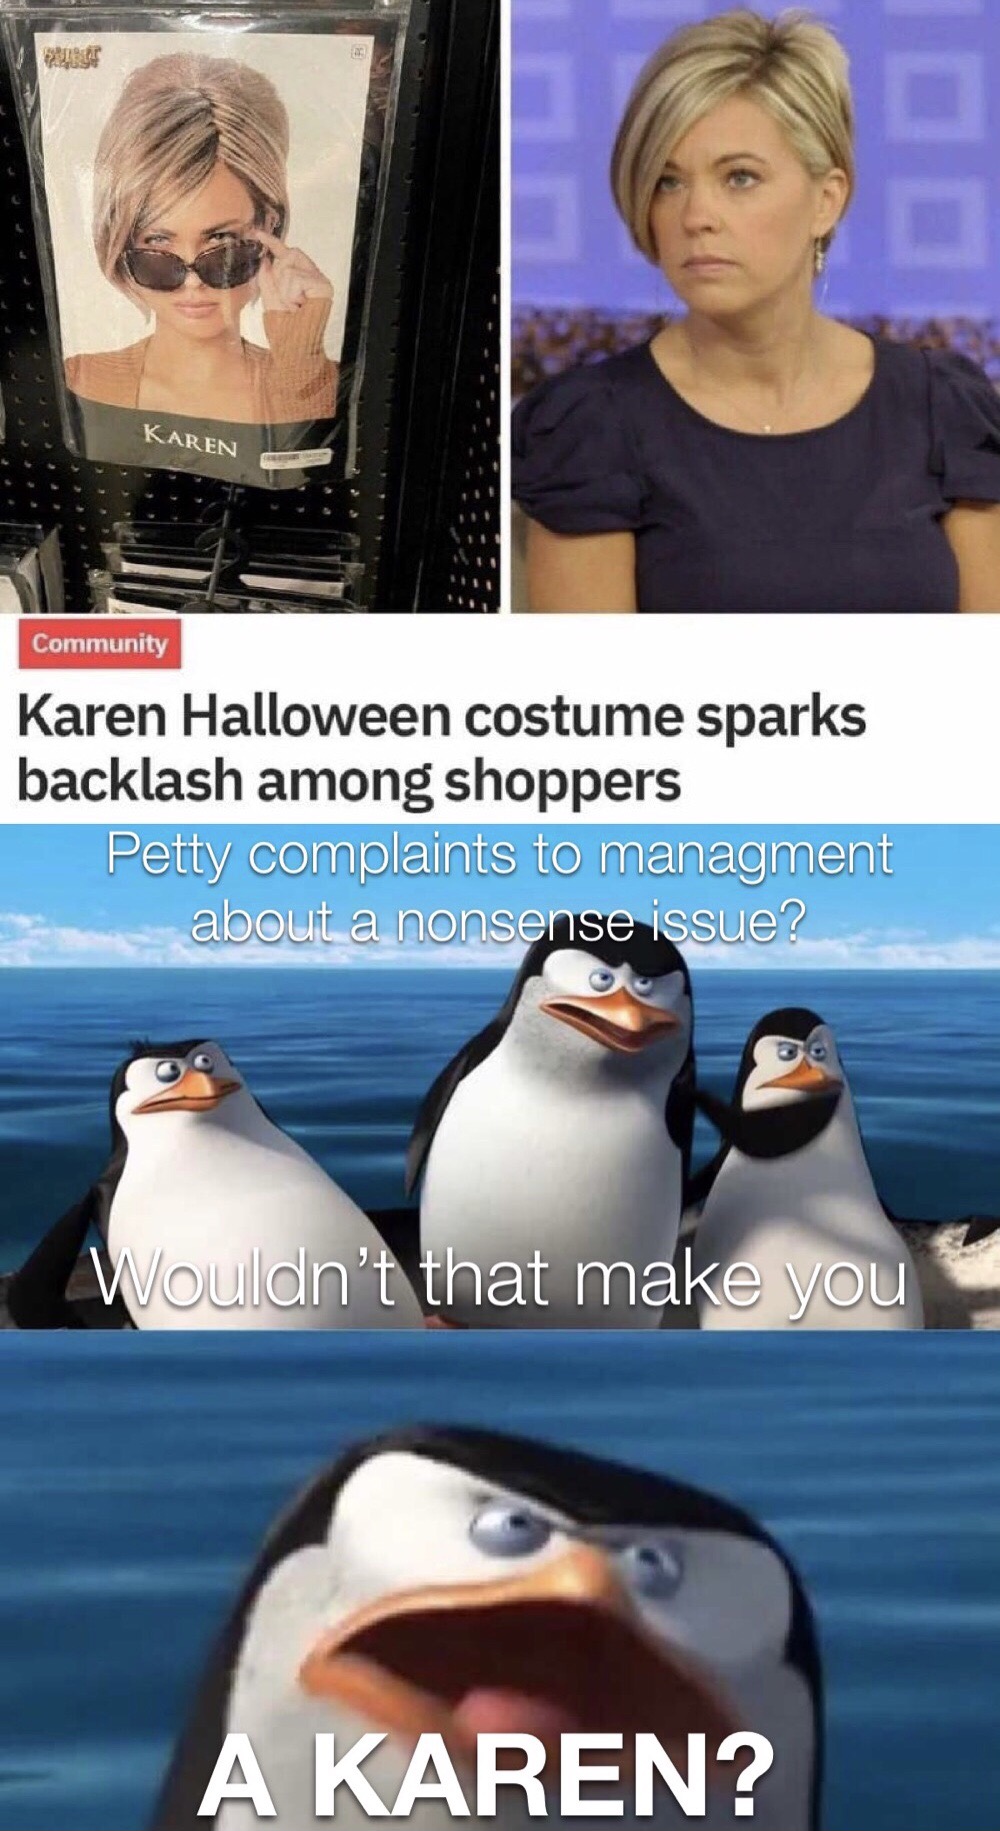 dank memes - your mom was ez - Karen Community Karen Halloween costume sparks backlash among shoppers Petty complaints to managment about a nonsense issue? Wouldn't that make you A Karen?